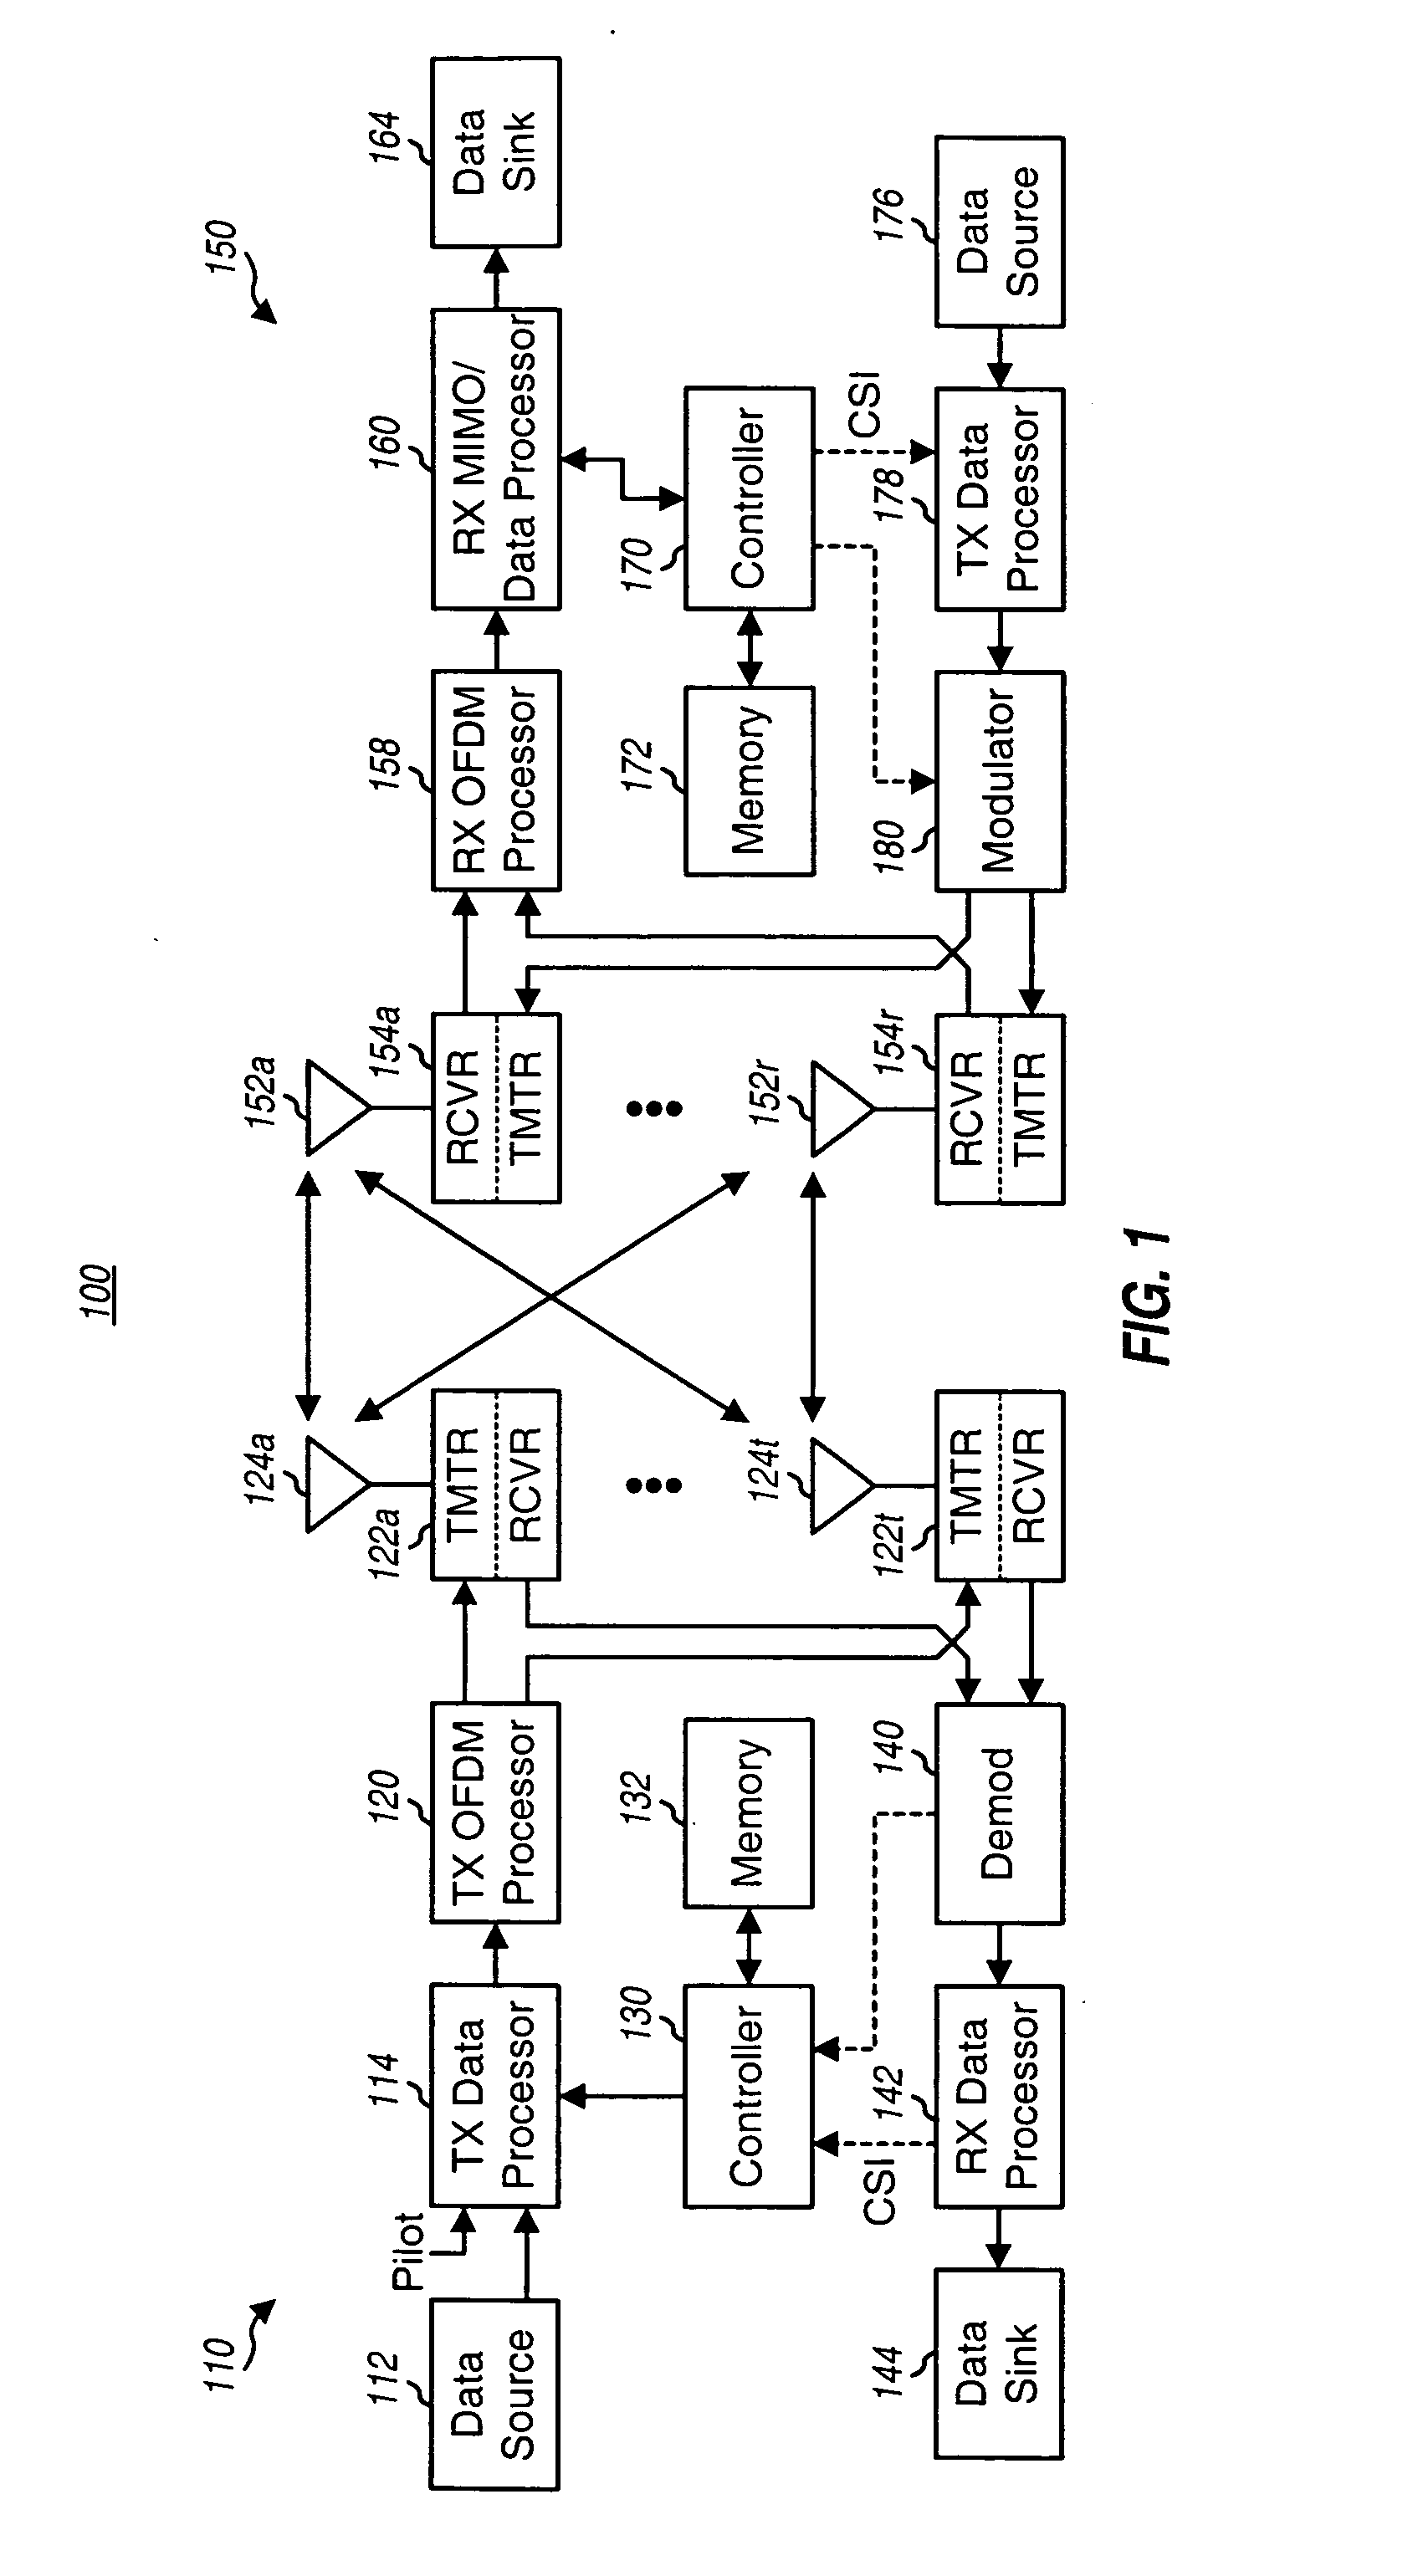 Ordered successive interference cancellation receiver processing for multipath channels